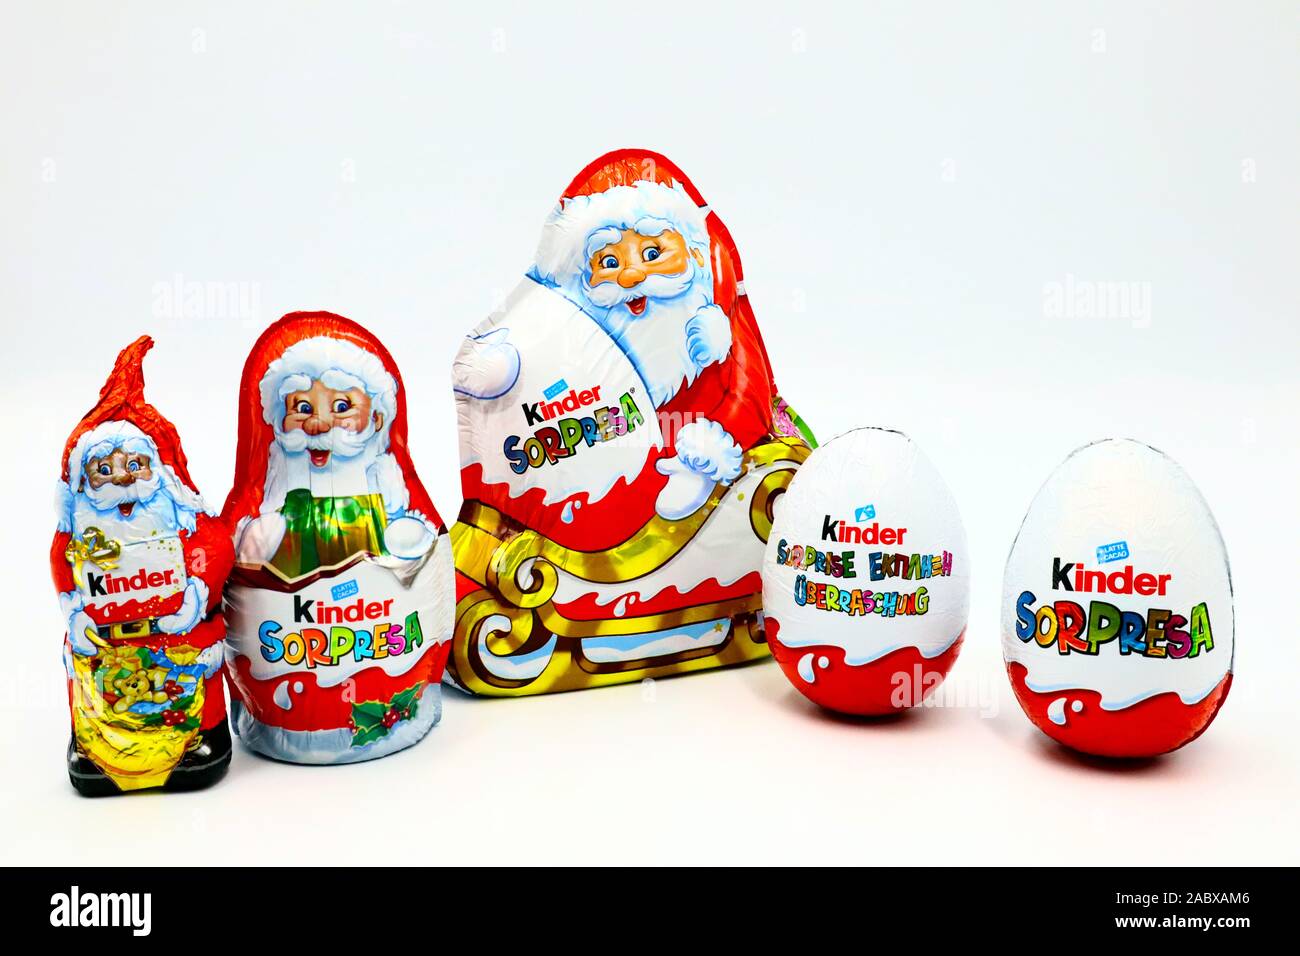 Babbo Natale Kinder.Italy Santa Claus High Resolution Stock Photography And Images Alamy